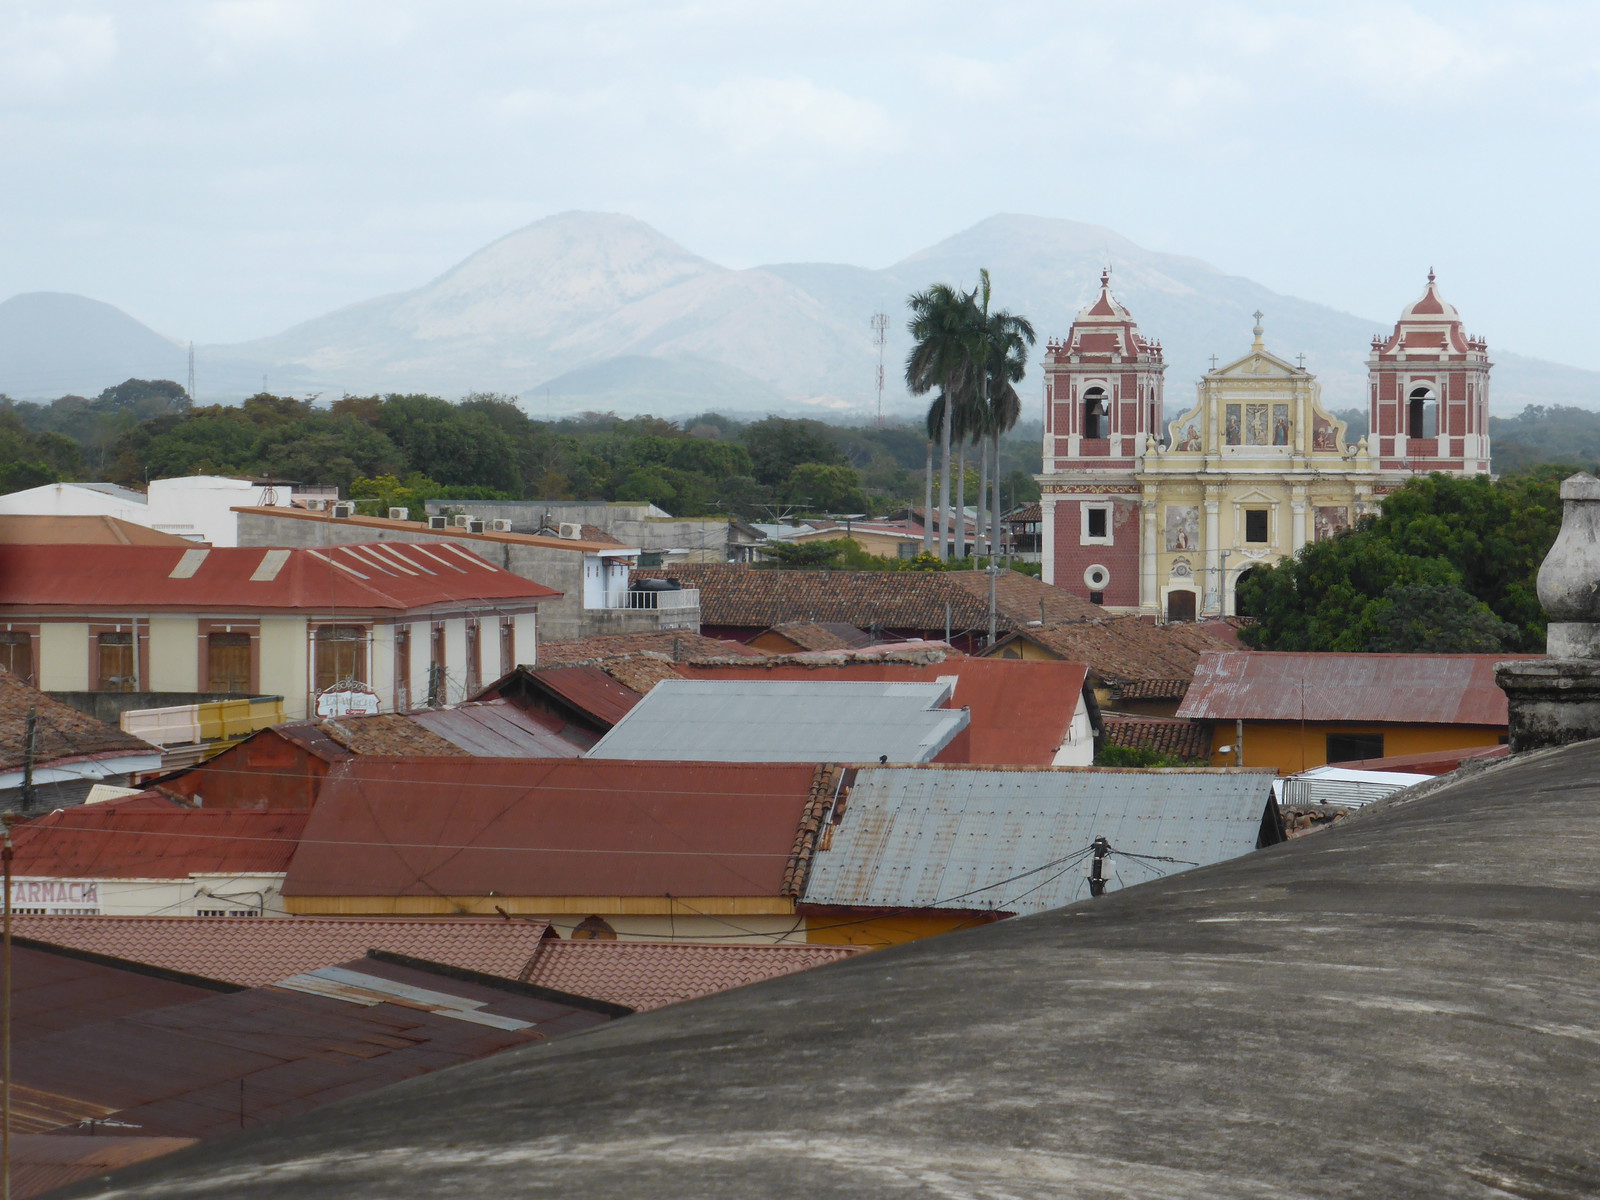 The view west from the cathedral roof towards Iglesia El Calvario